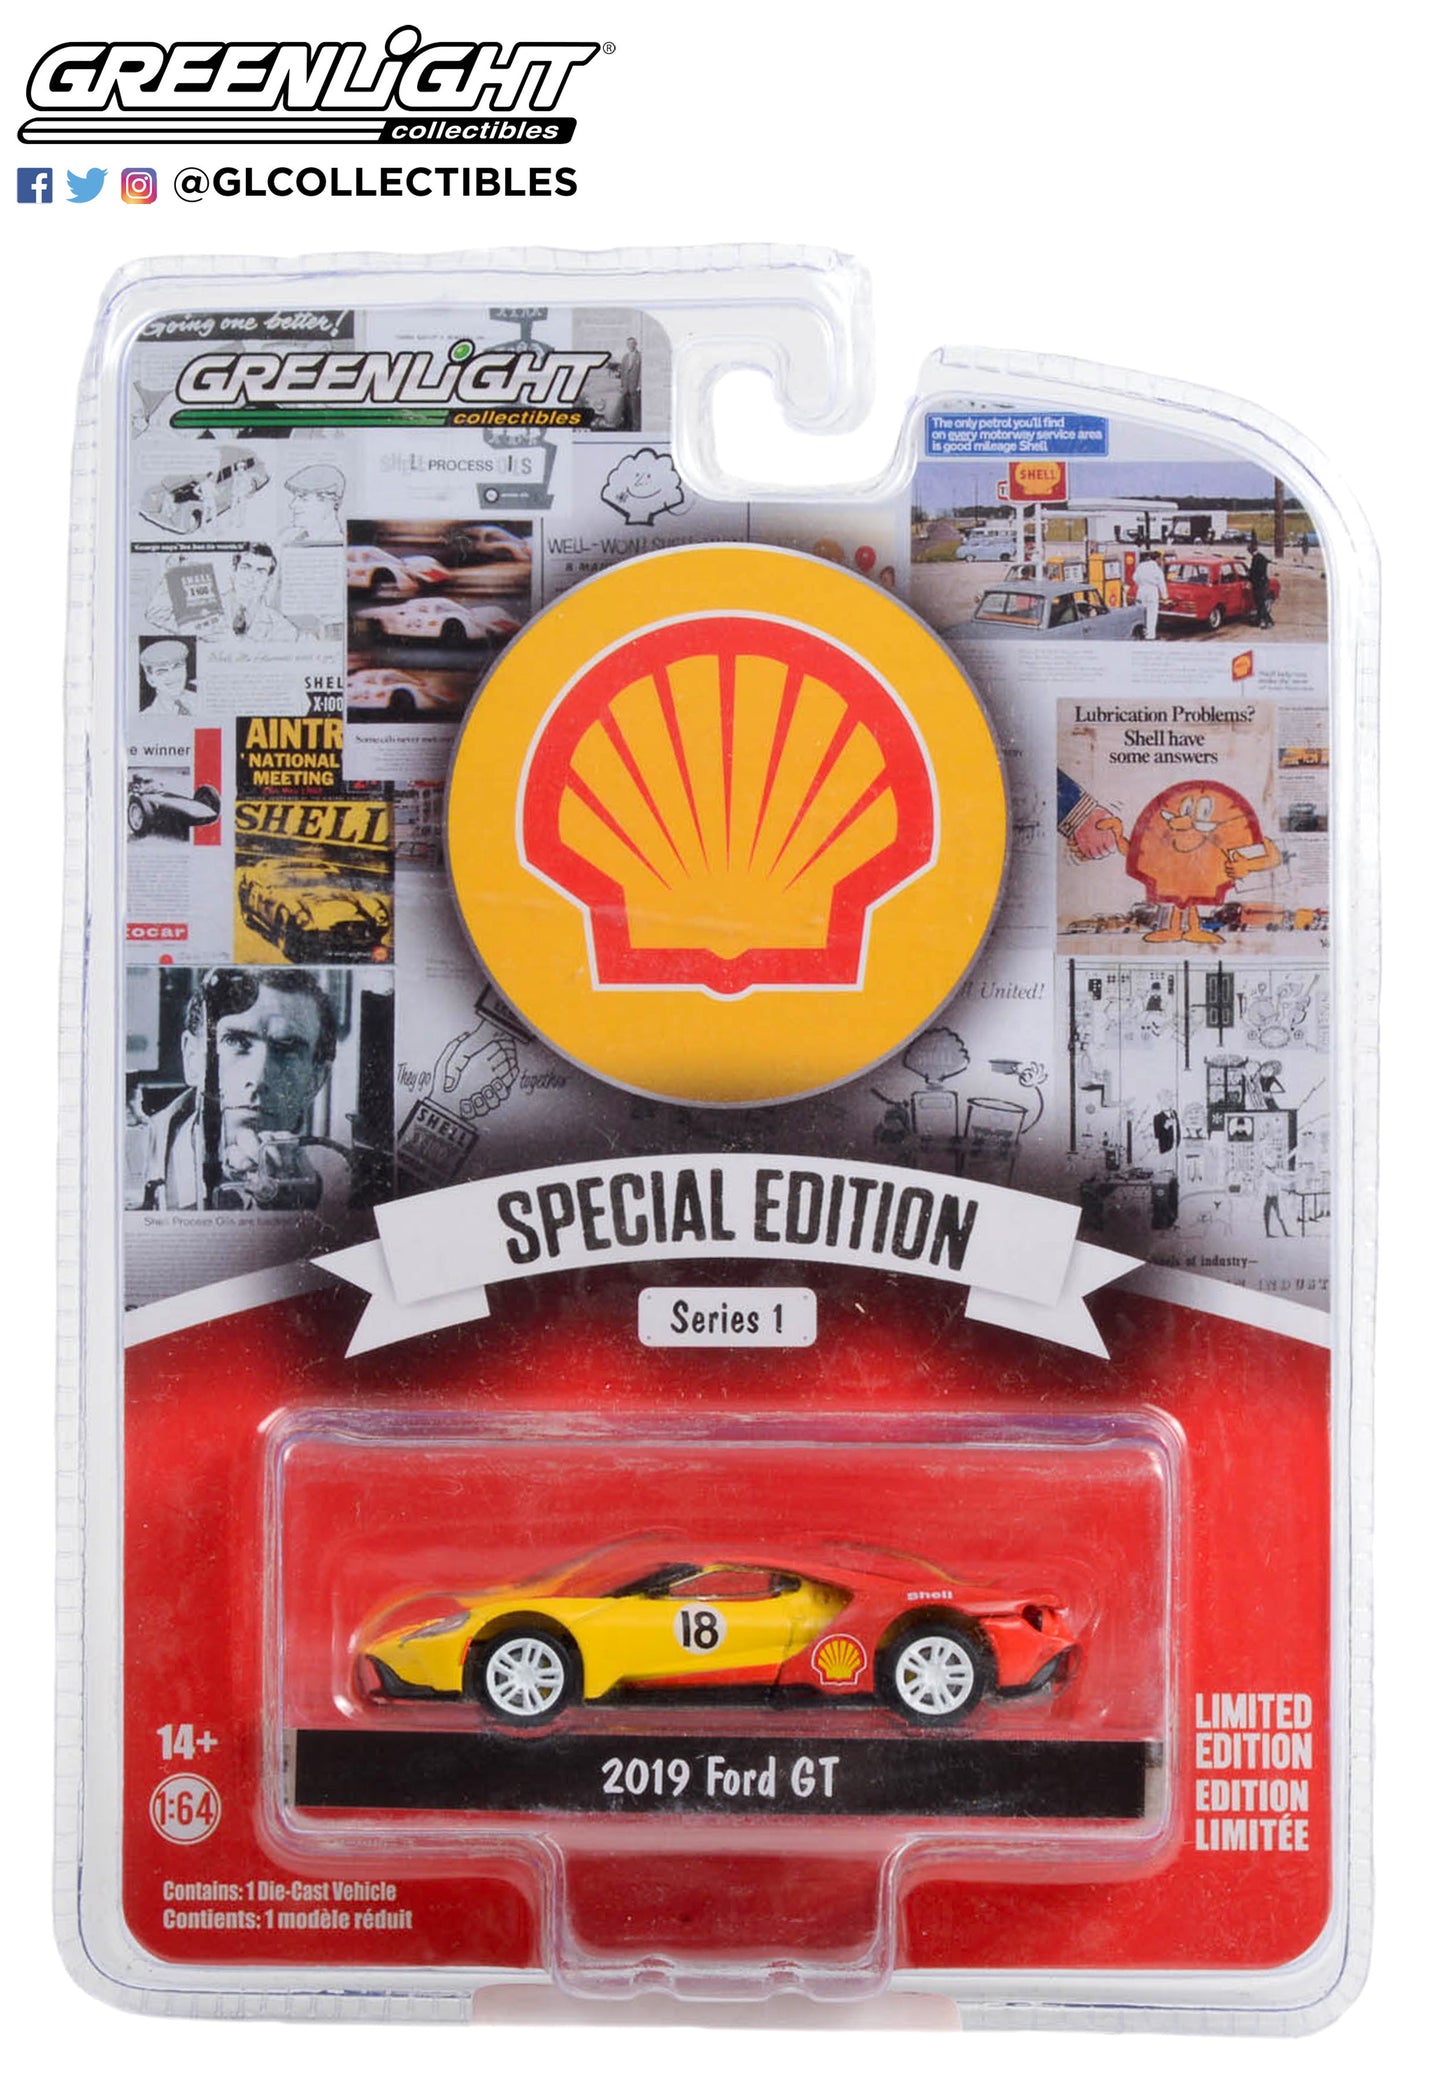 GreenLight 1:64 Shell Oil Special Edition Series 1 - 2019 Ford GT #18 Shell Oil 41125-E